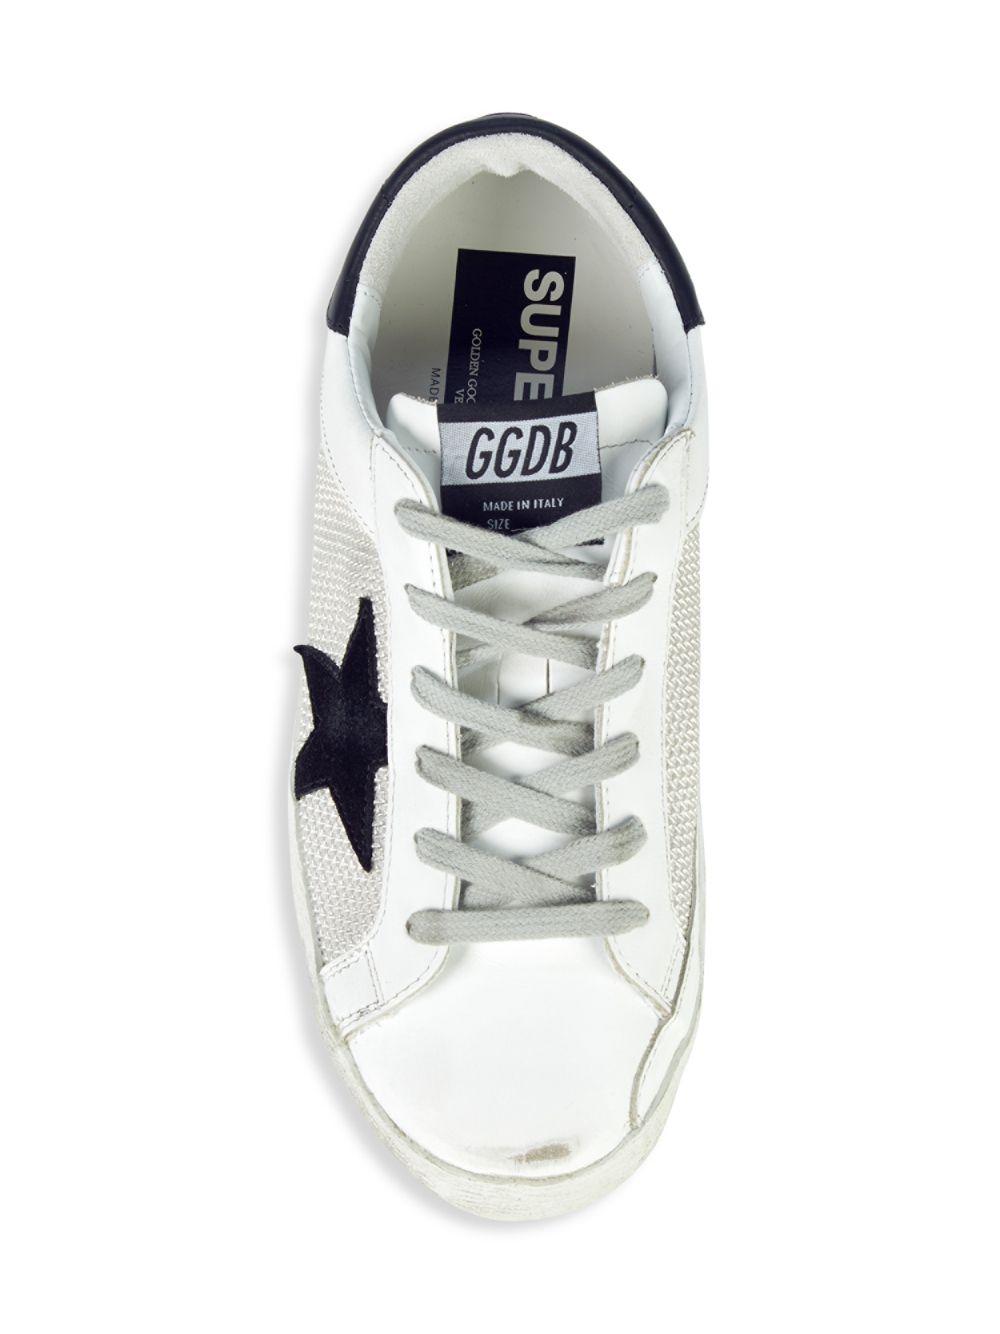 Goose Superstar Mixed Media Sneakers in White - Lyst